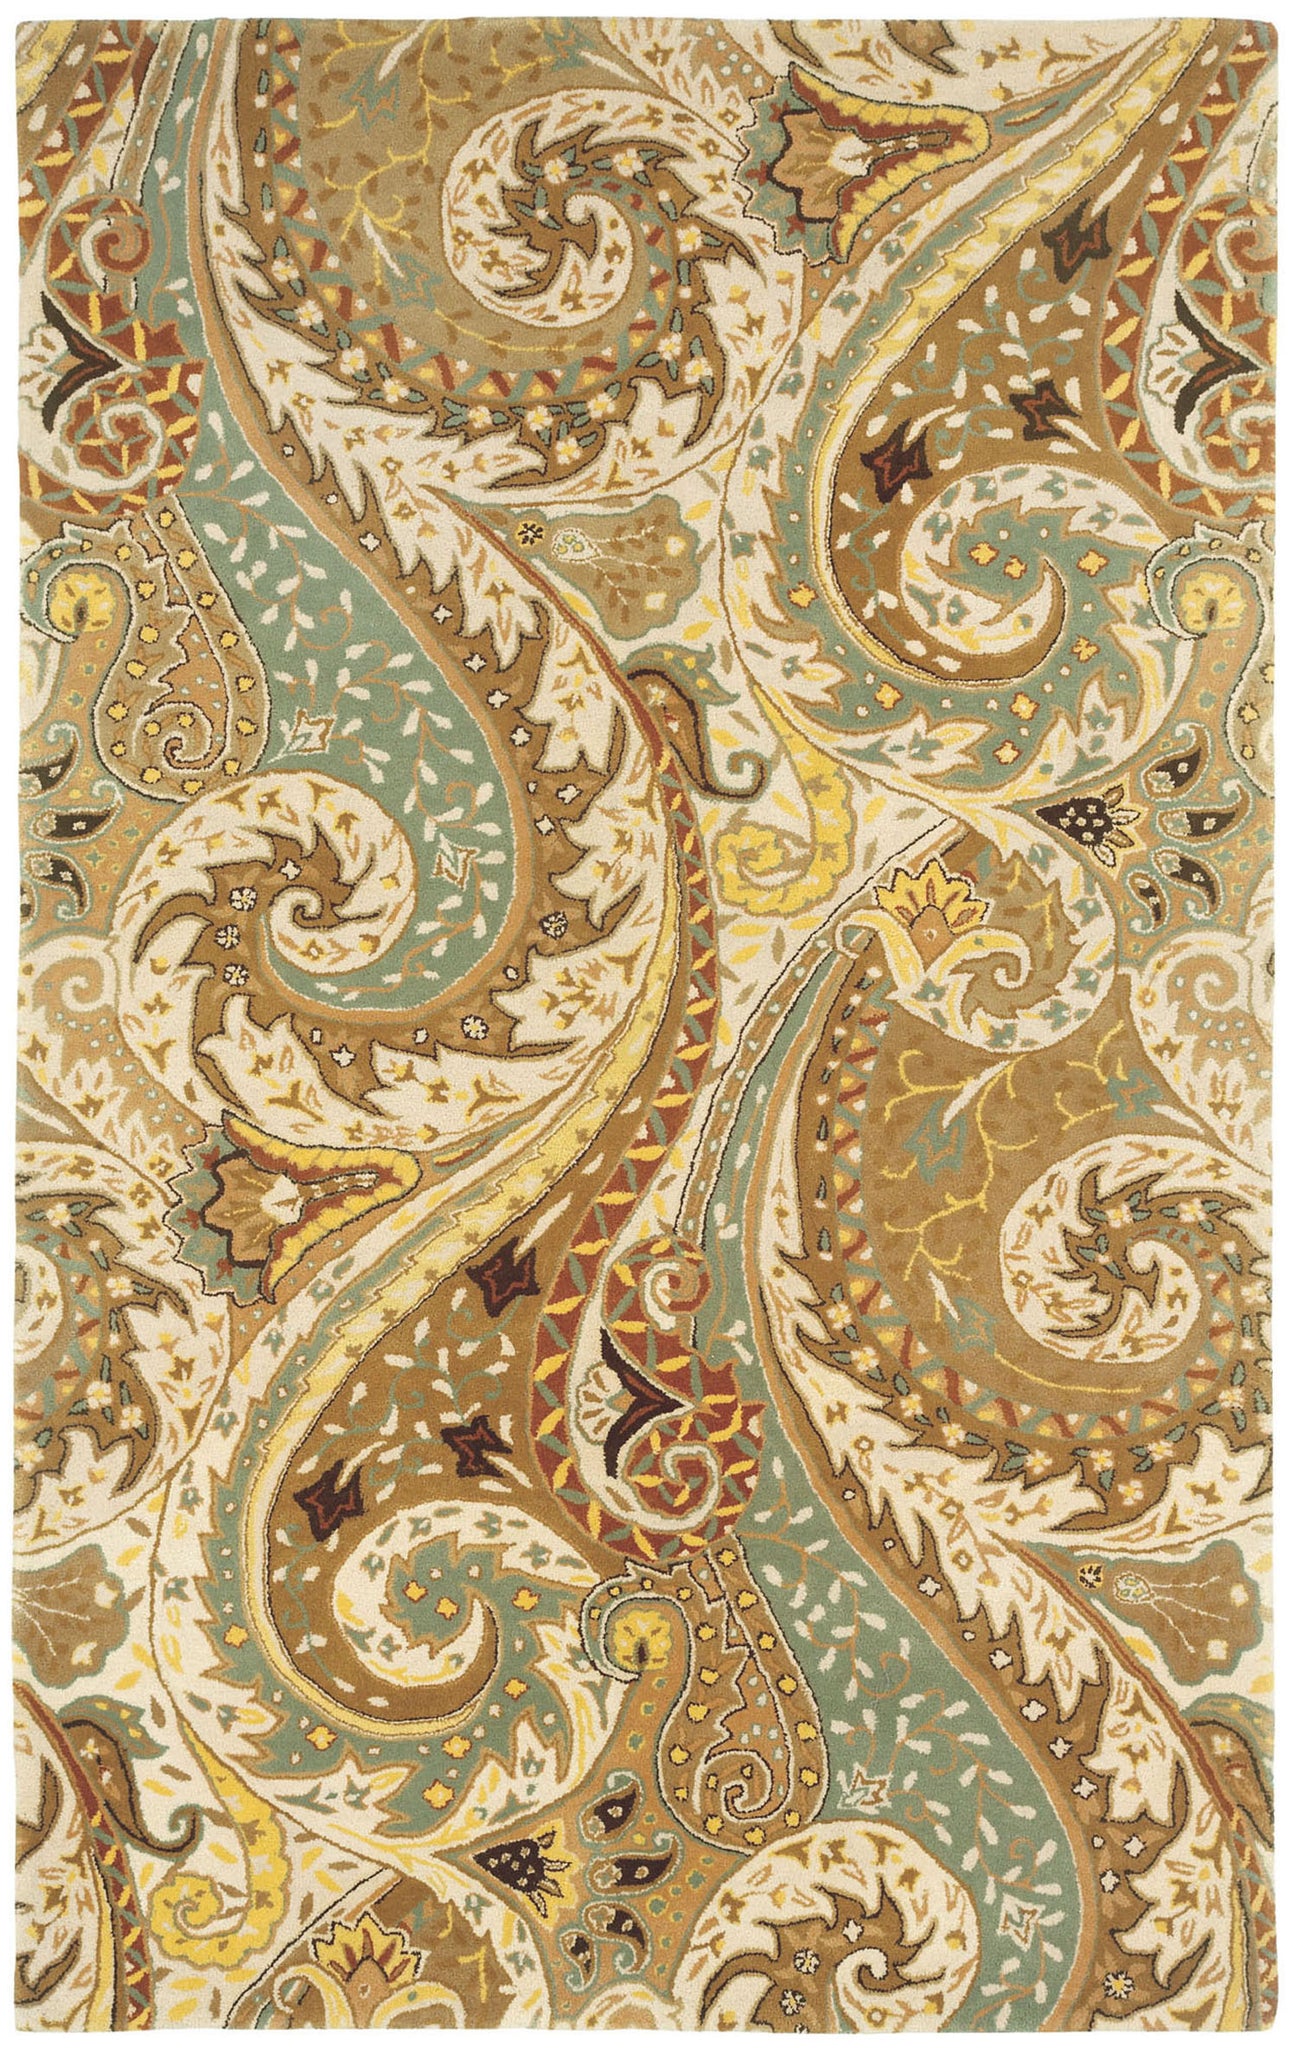 Capel Boteh 3874 Camel 725 Area Rug by Williamsburg main image